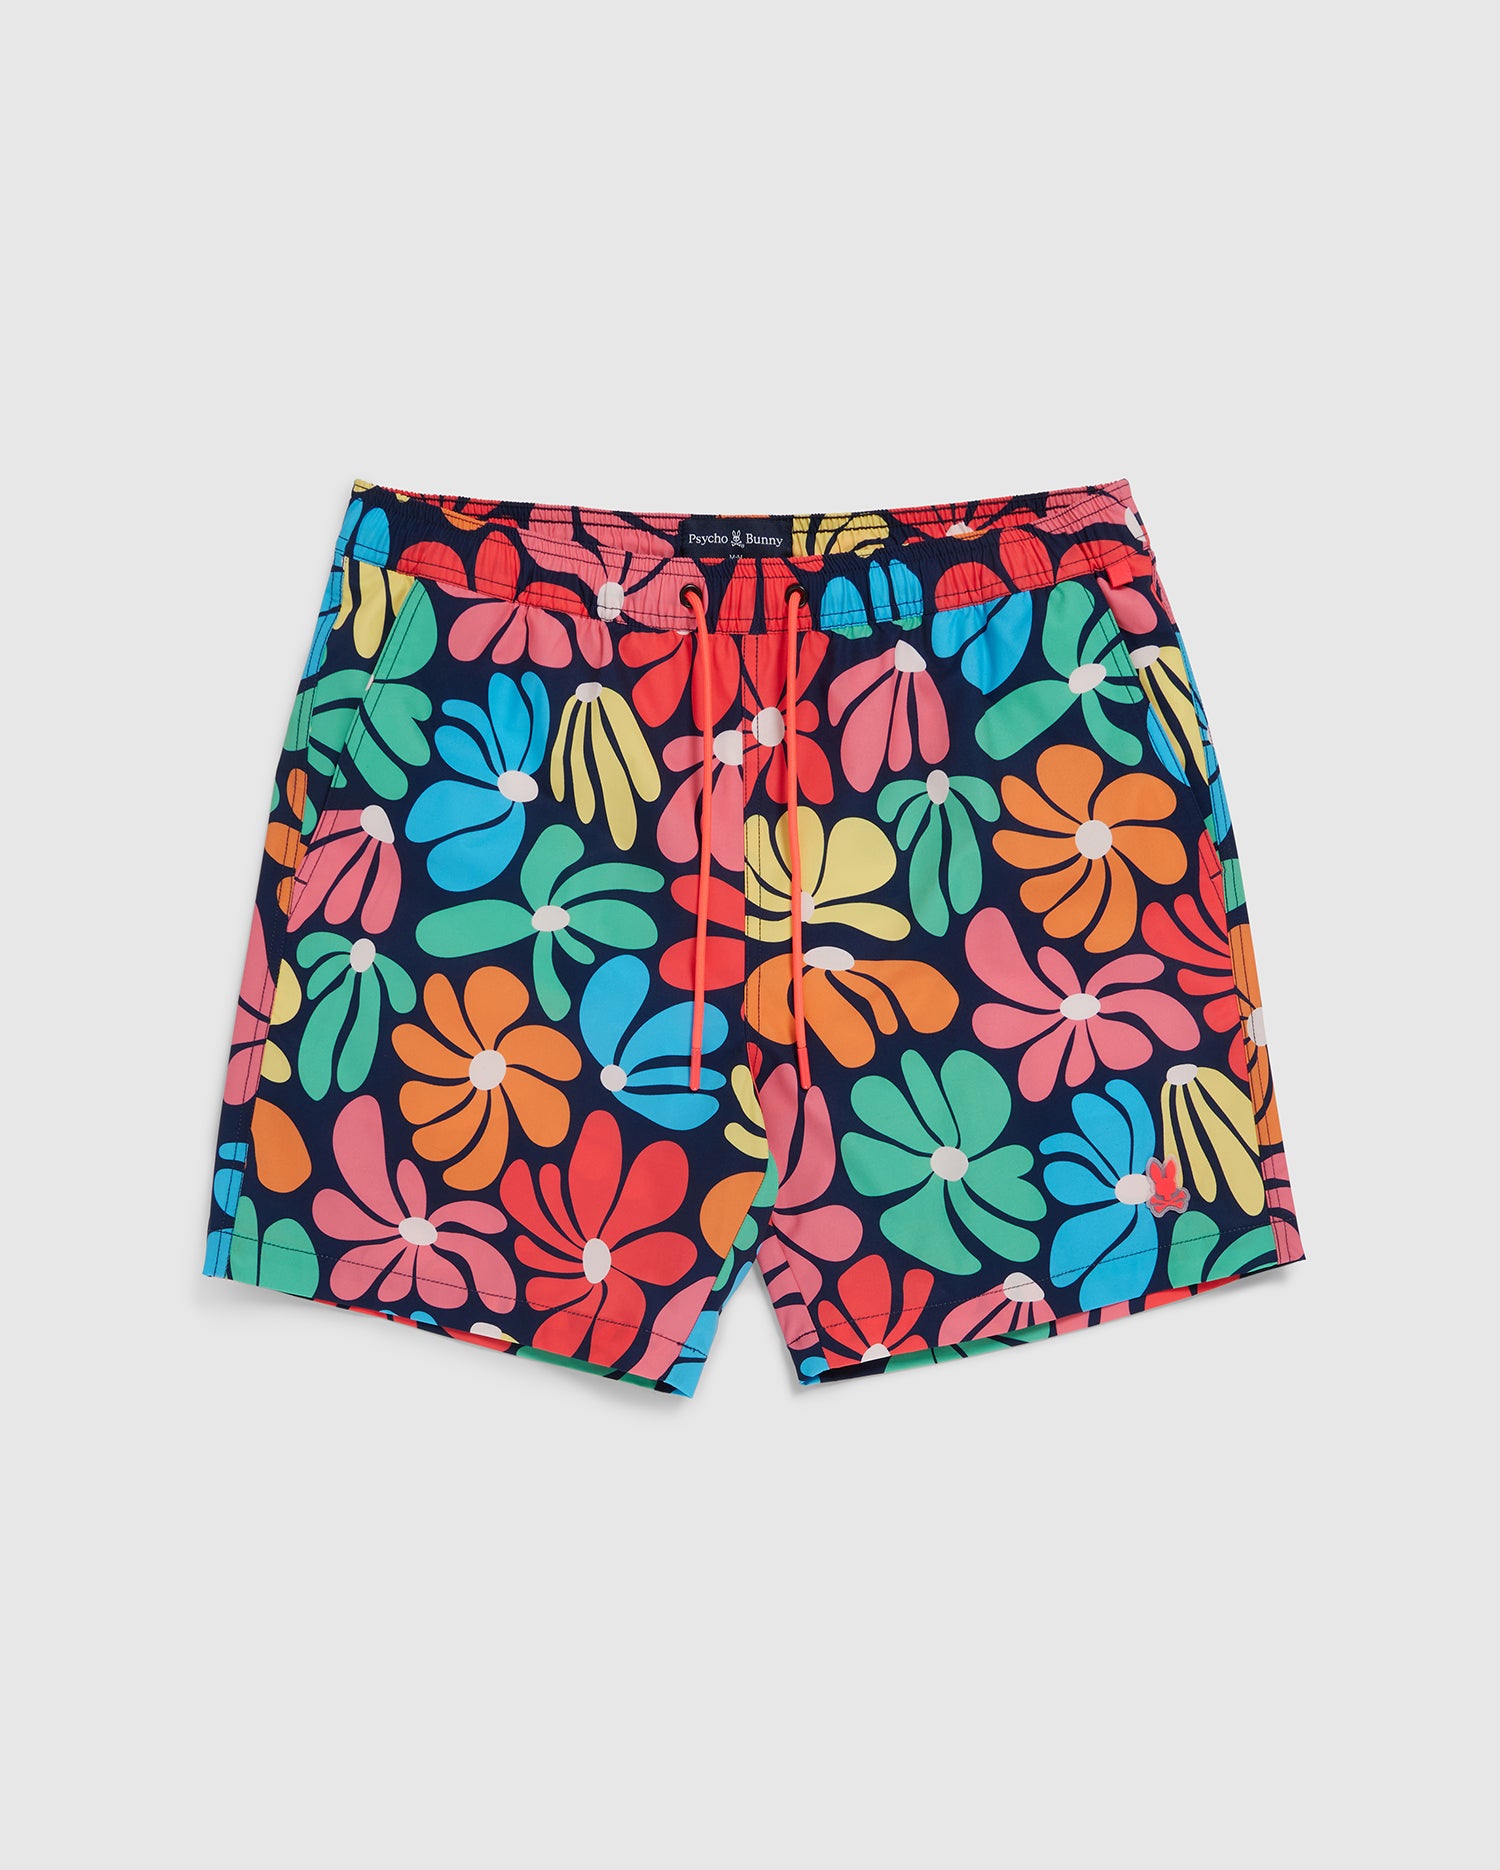 A pair of Psycho Bunny MENS MENTZ SWIM TRUNK - B6W320B2SW featuring large, vibrant flowers in shades of blue, green, yellow, pink, orange, and red. The shorts have an elastic waistband with a red drawstring for adjustment. The quick-dry swim trunk has a white background.